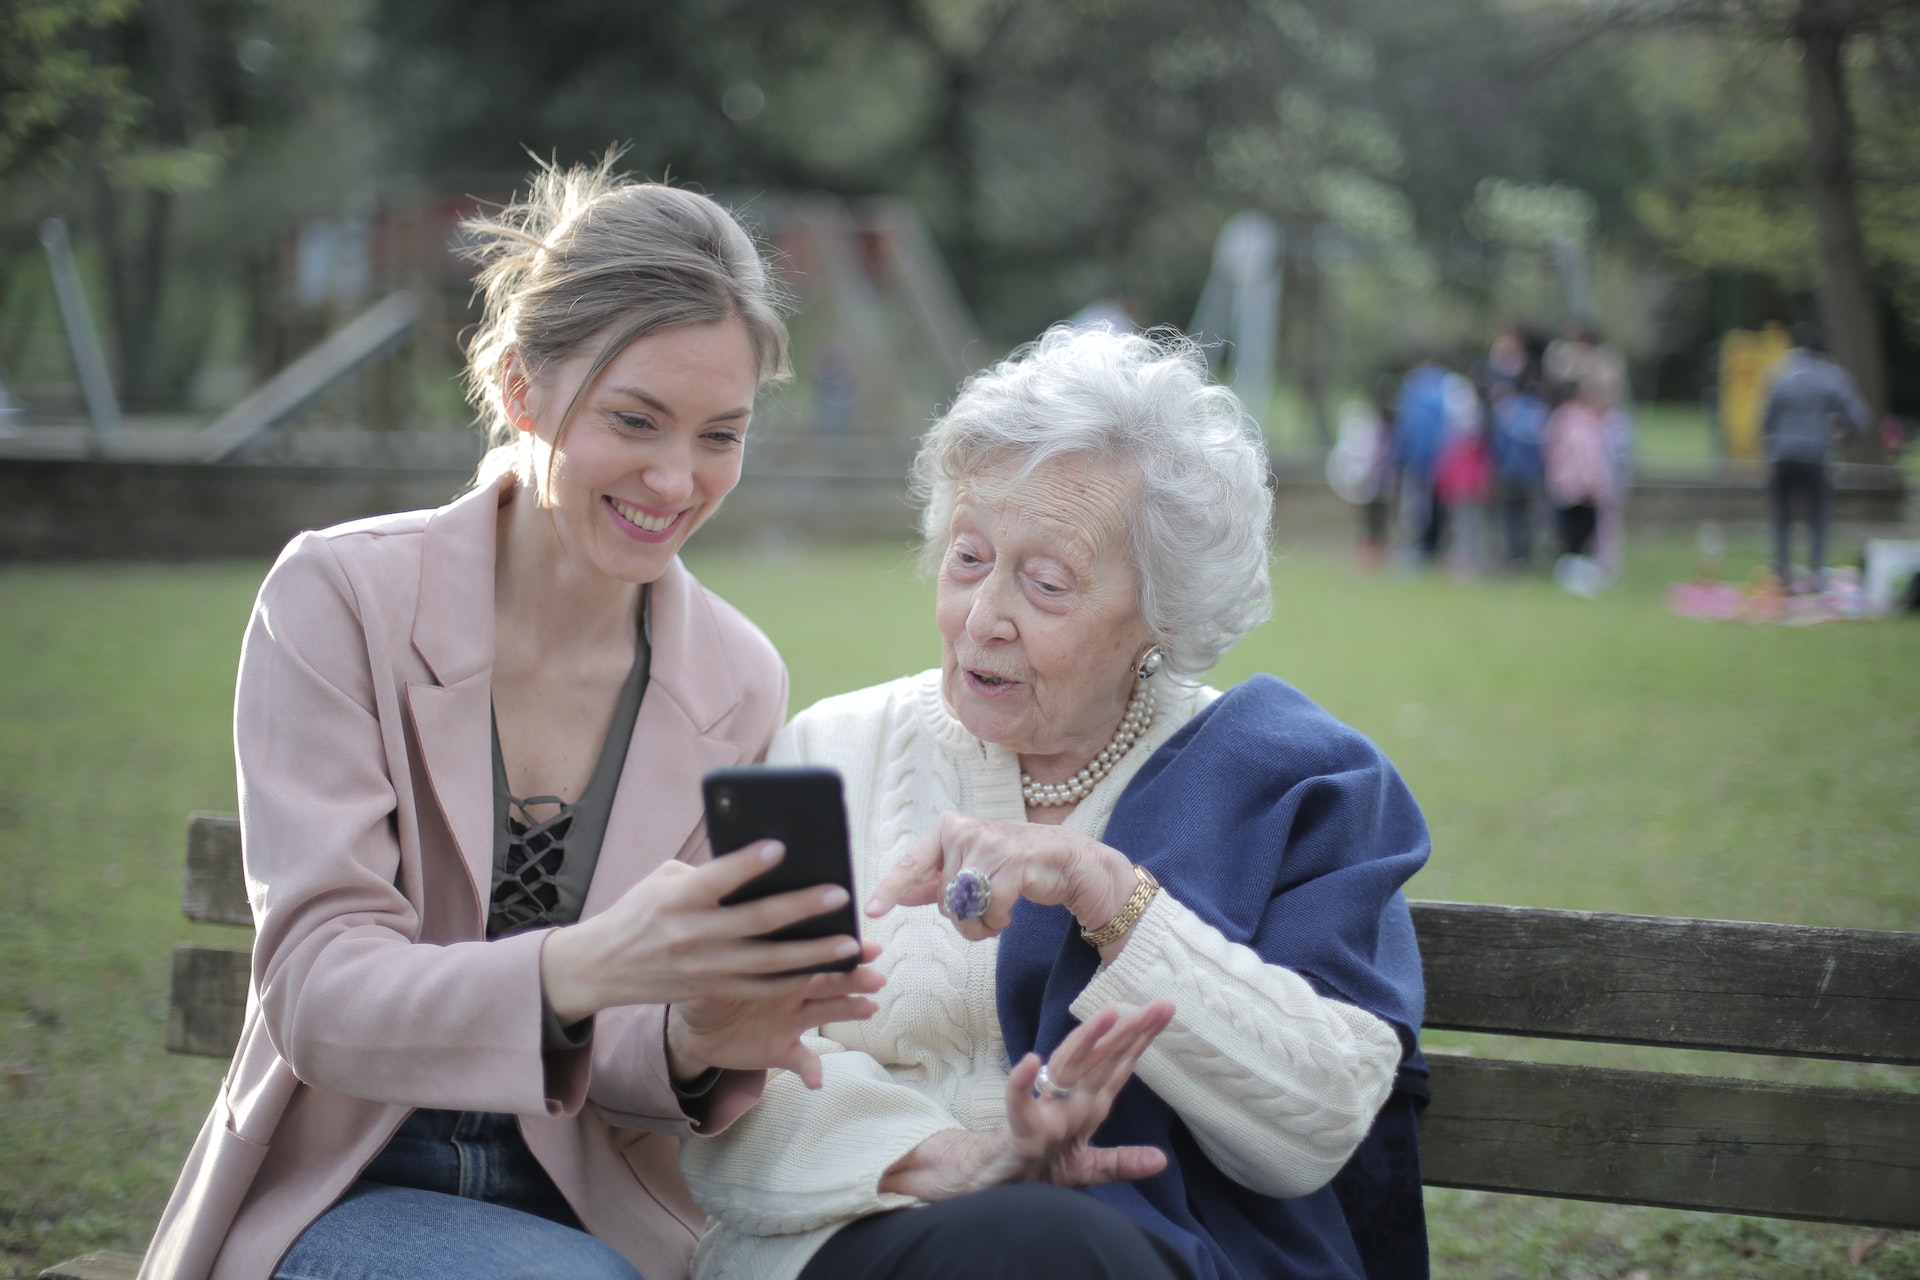 Younger woman showing older woman something on a cell phone